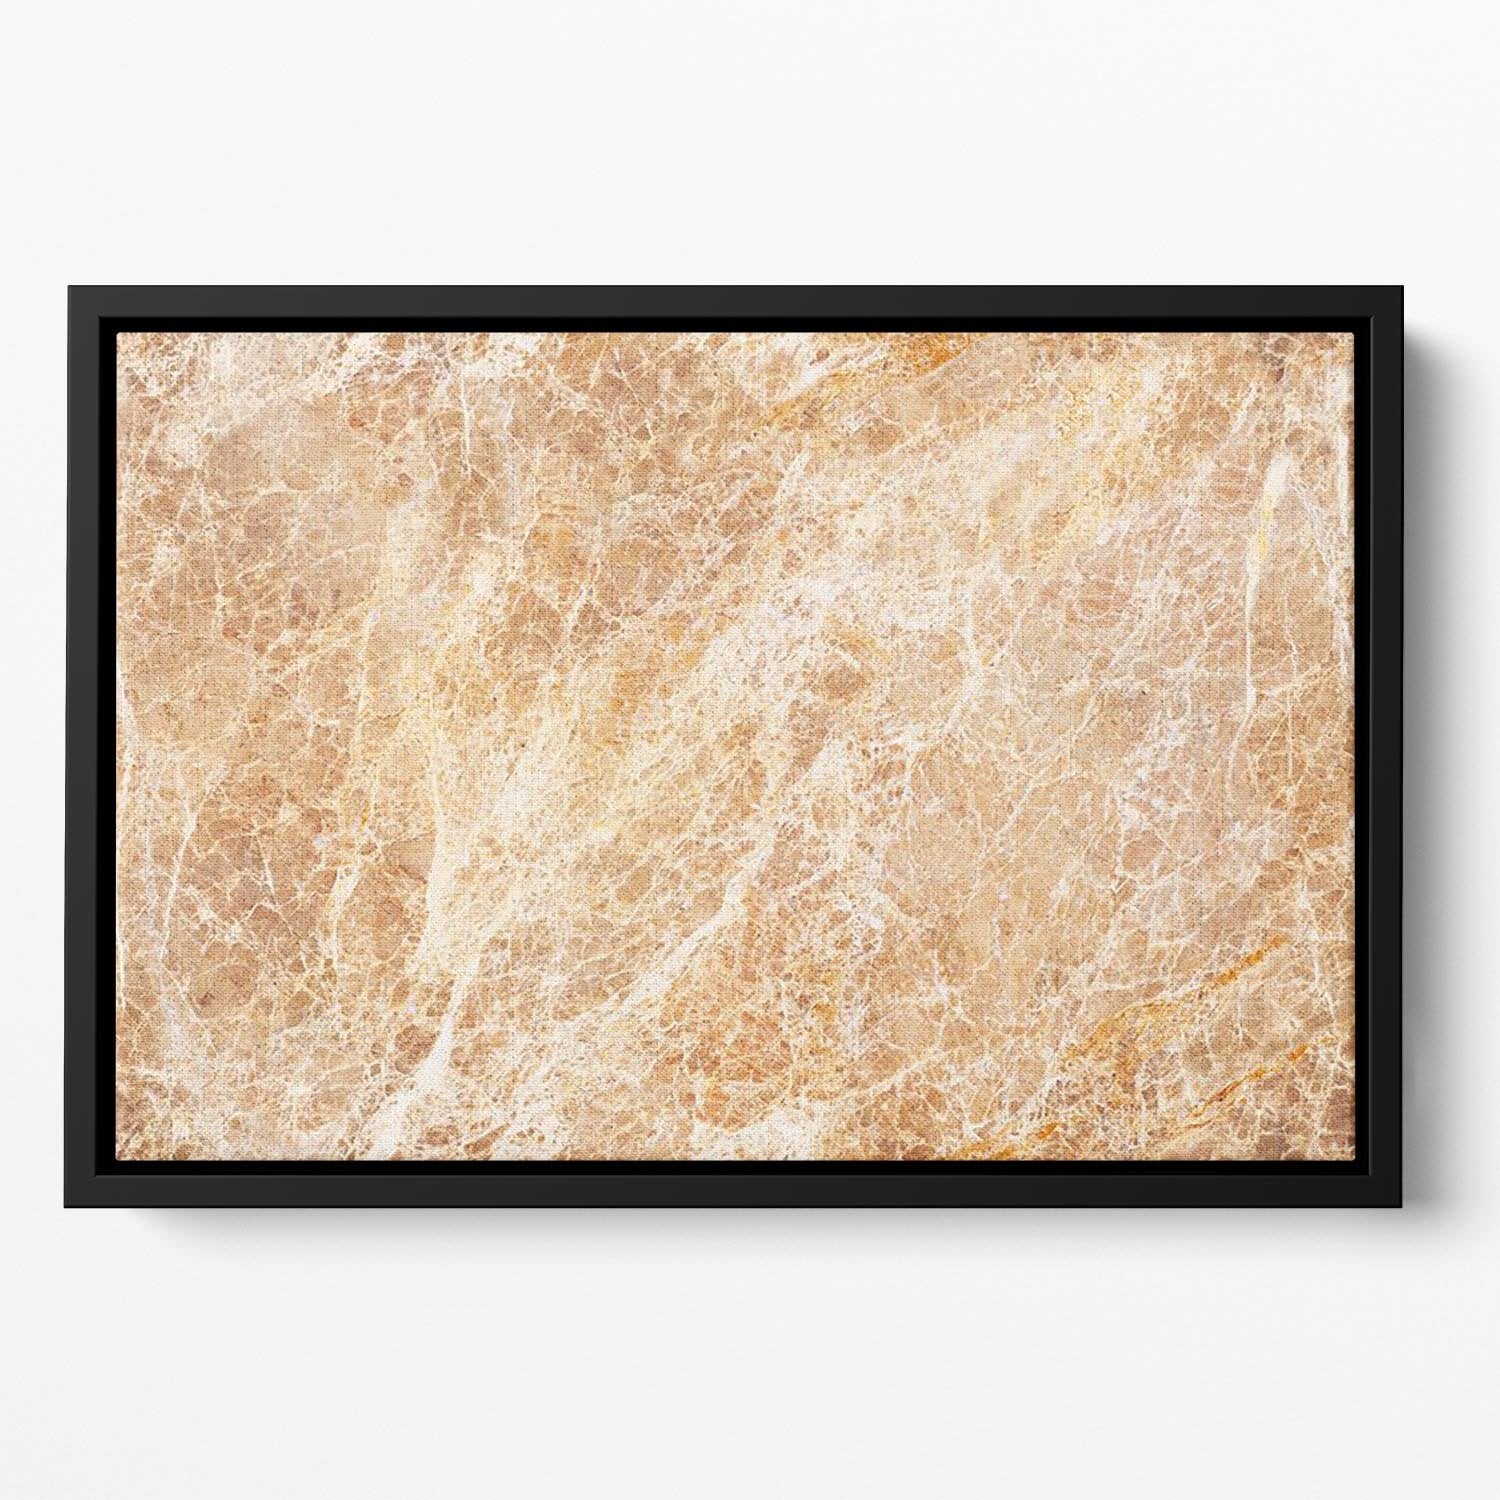 Warm colored natural marble Floating Framed Canvas - Canvas Art Rocks - 2